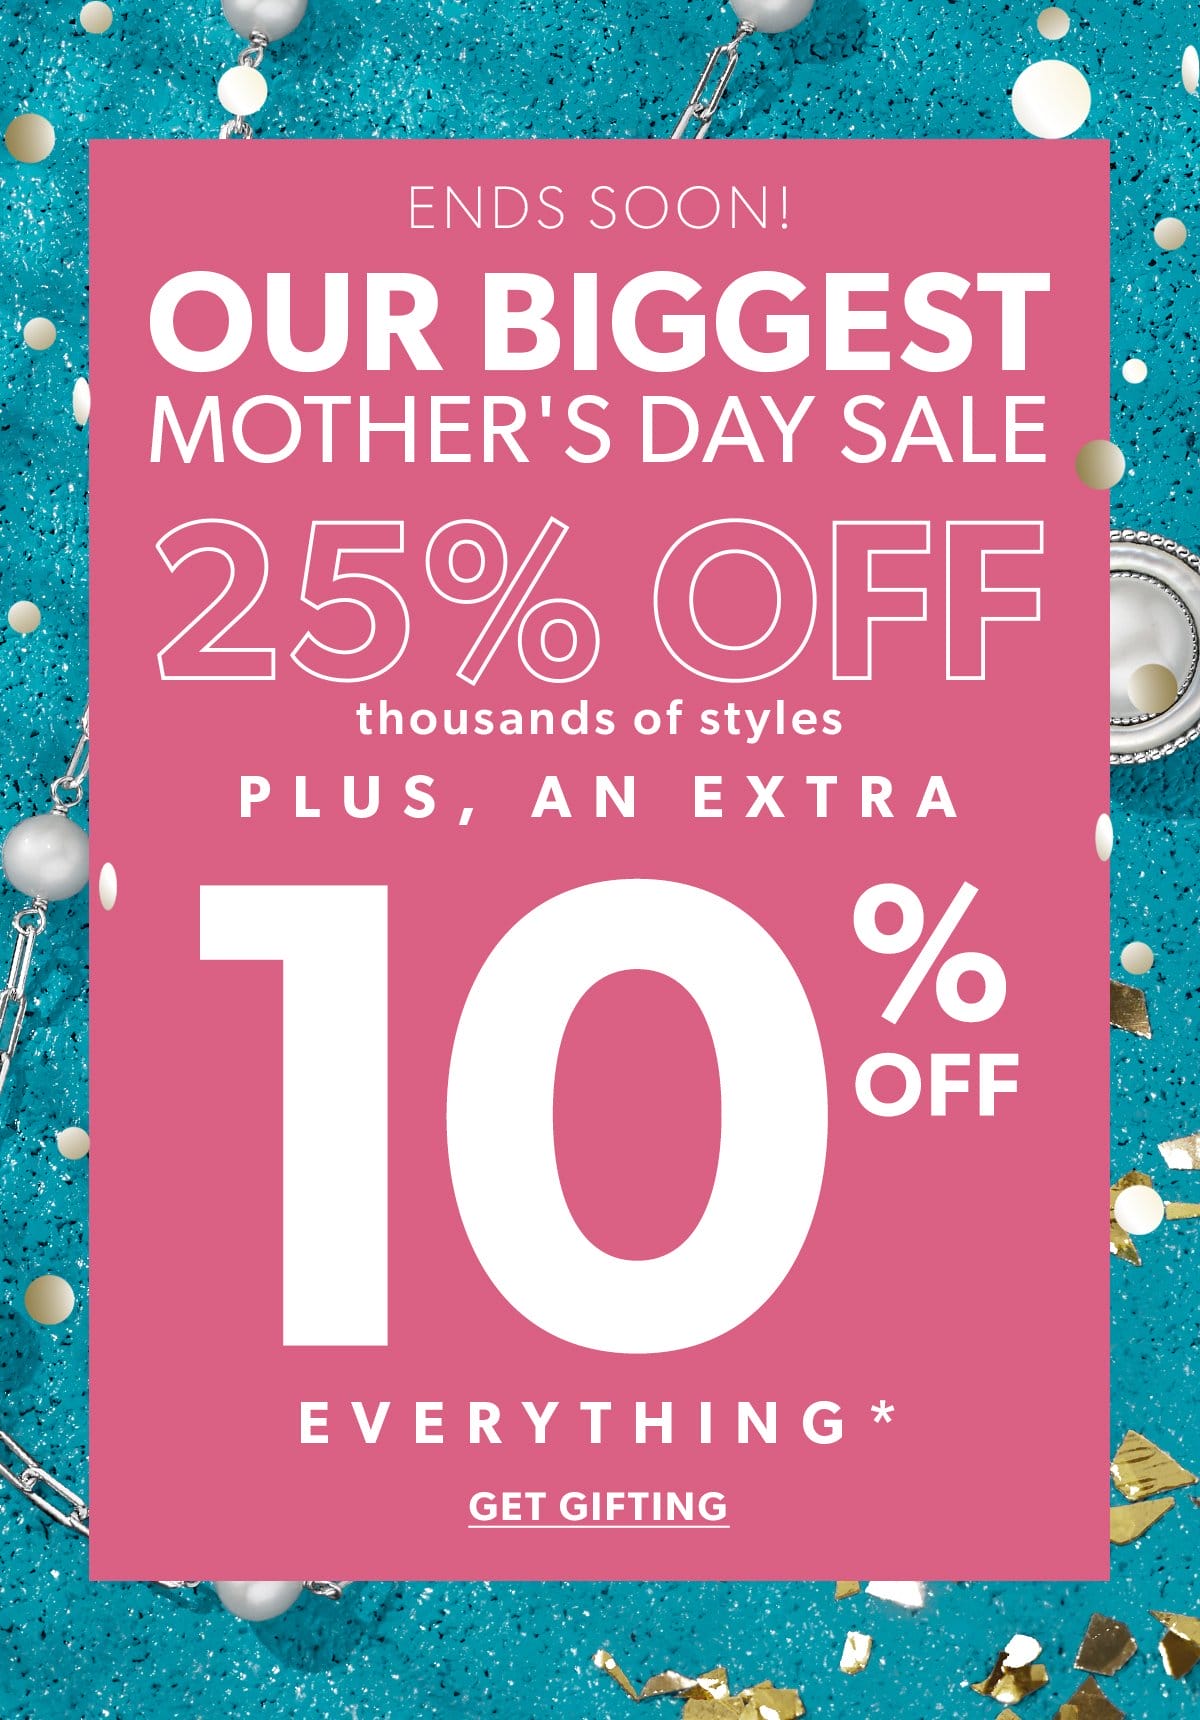 One3 Week Only. Mother's Day Celebration